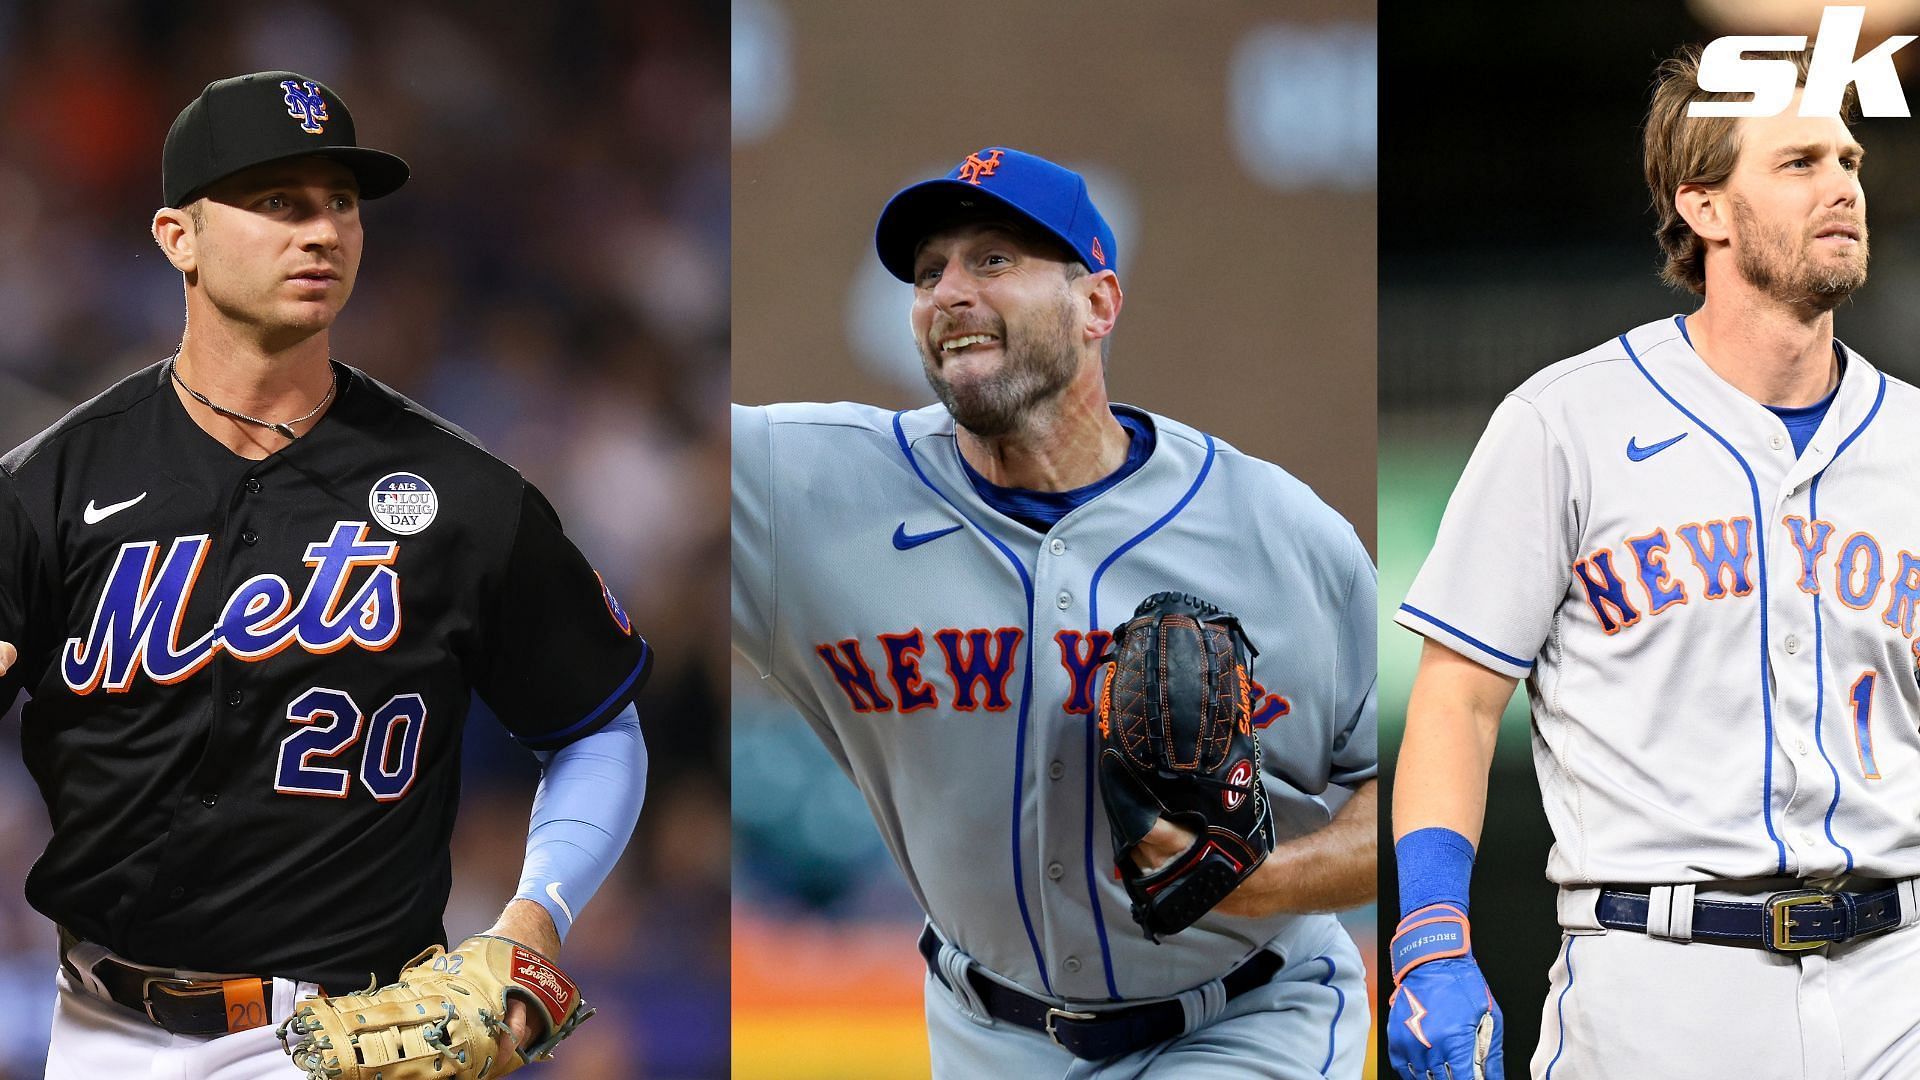 An MLB insider has suggested that the New York Mets could be shopping some of their talent around